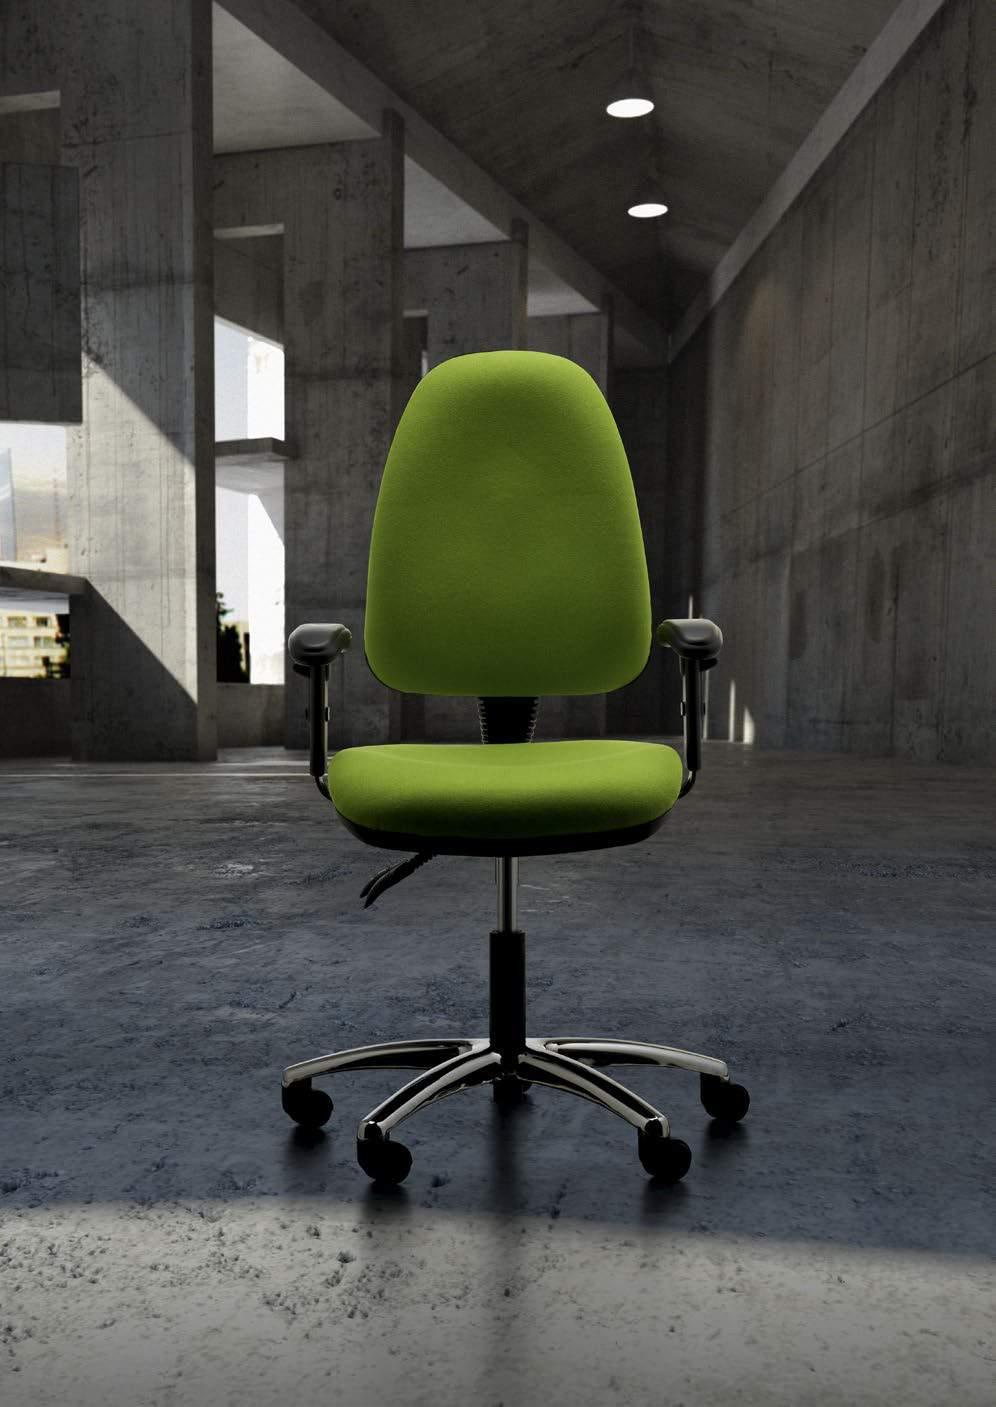 Look_ Work seating designed by Verco Look provides anatomically designed seating at a competitive price point.